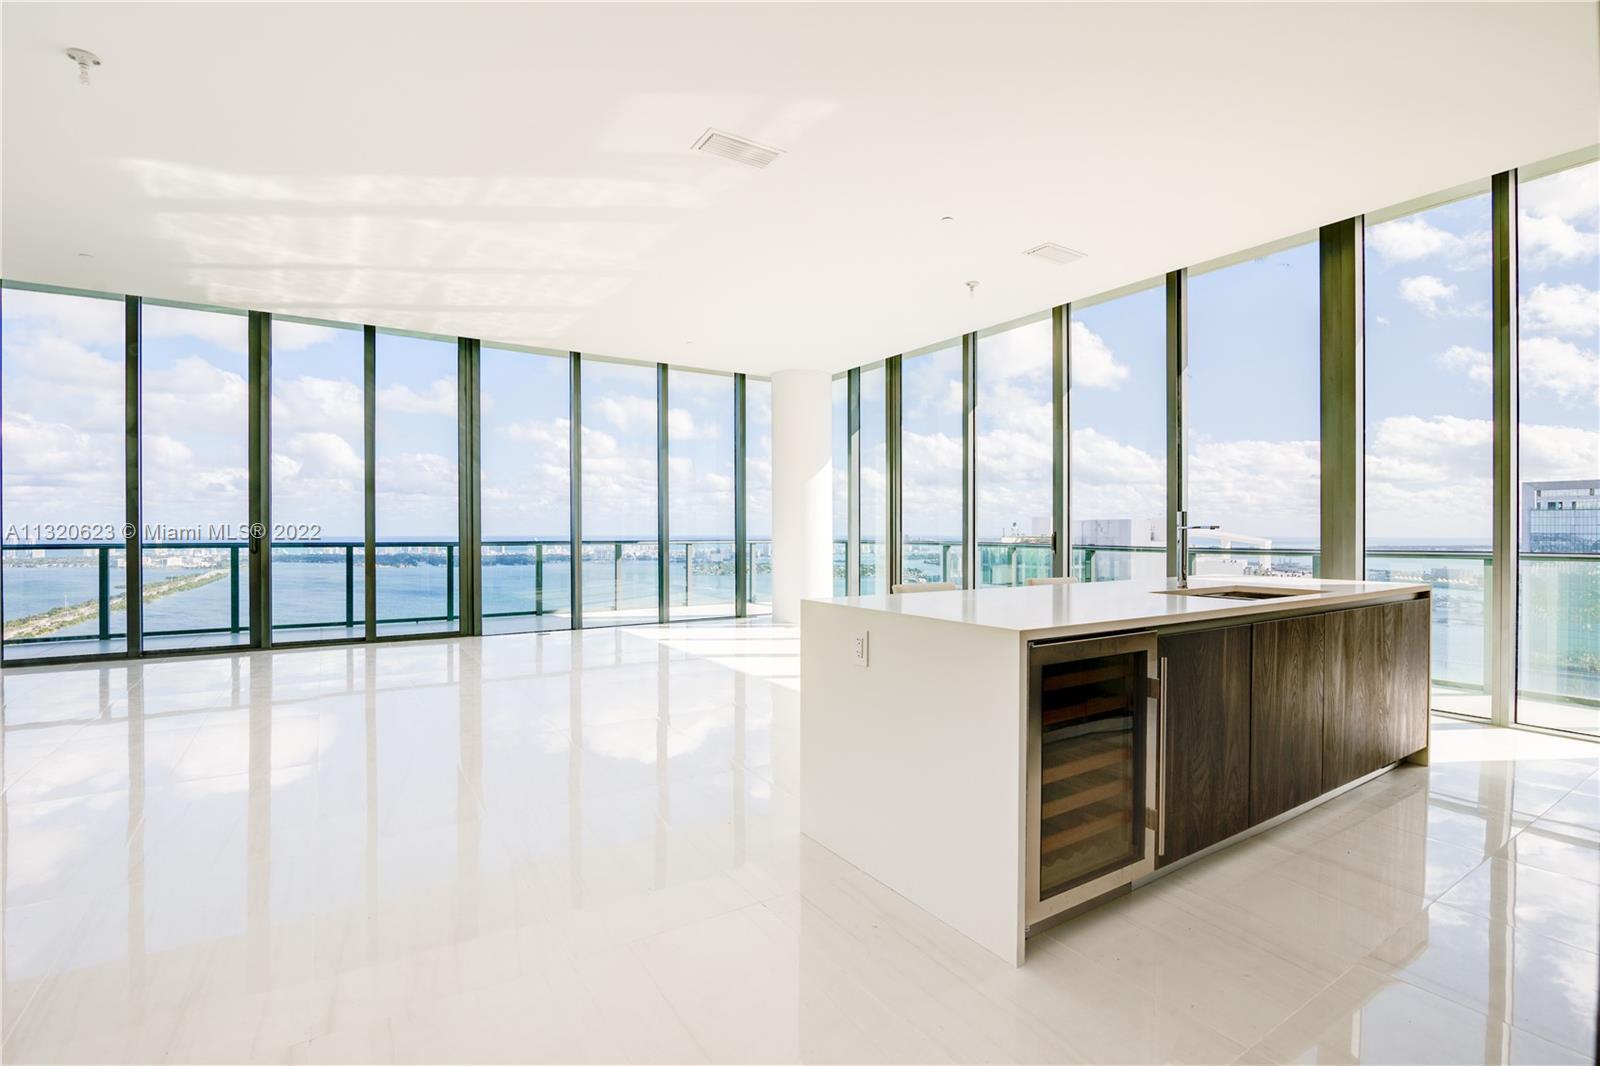 Private elevator access, 5 bd / 5.5 baths two-story AMAZING Penthouse featuring direct, unobstructed